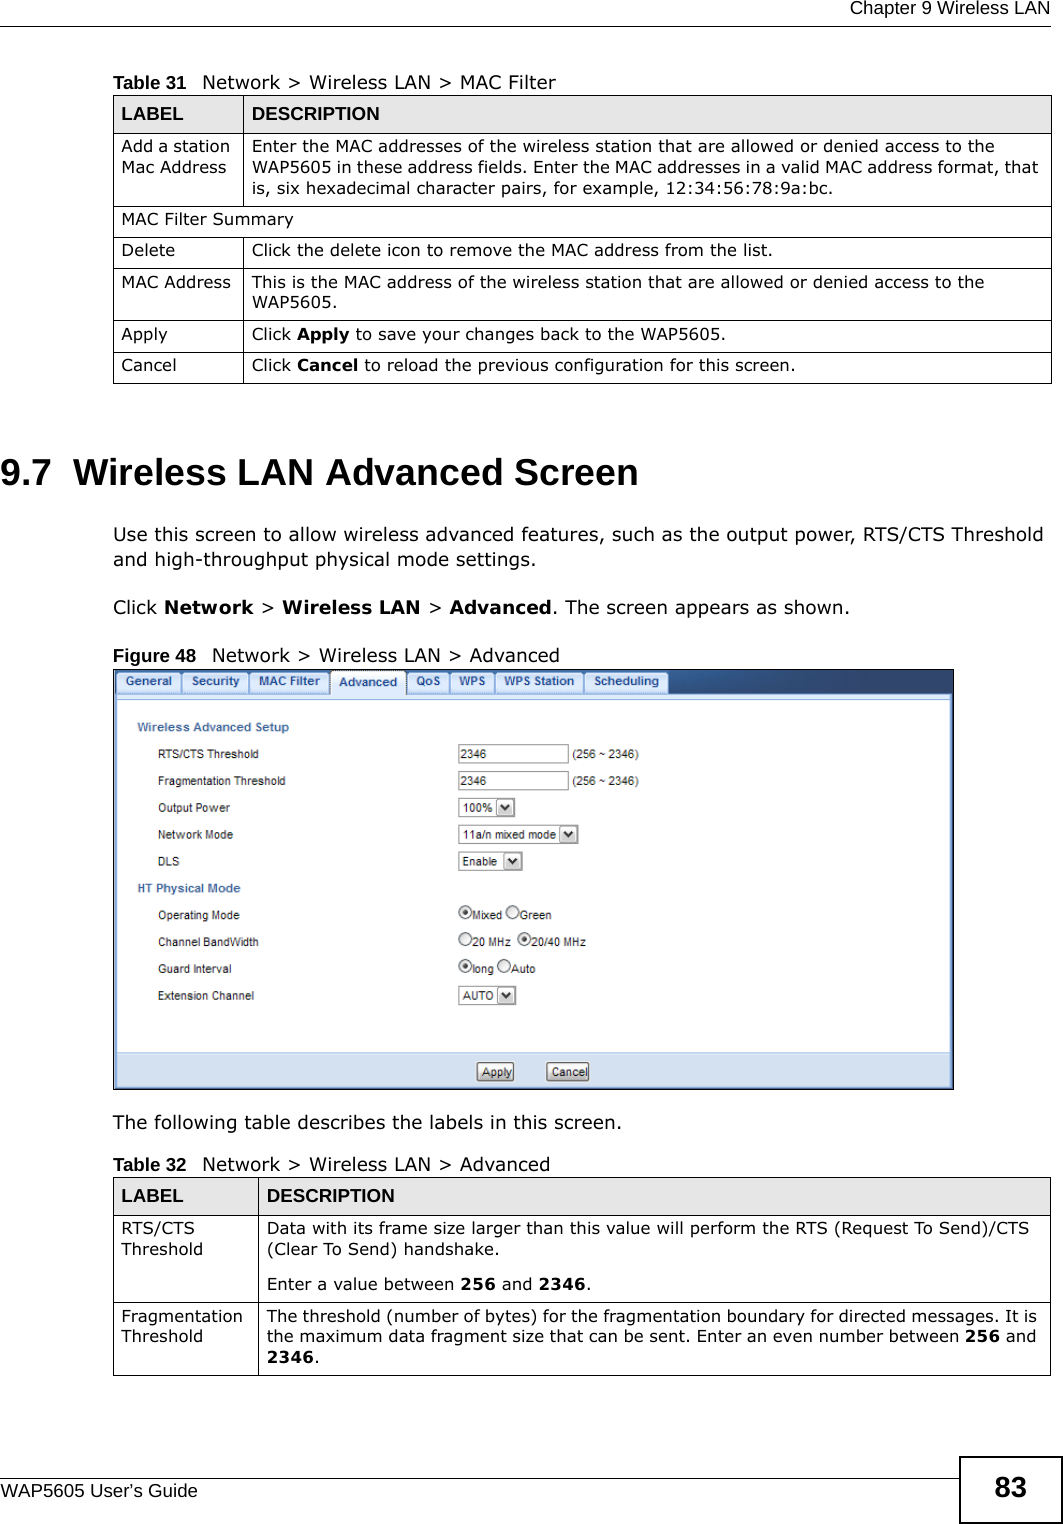  Chapter 9 Wireless LANWAP5605 User’s Guide 839.7  Wireless LAN Advanced Screen  Use this screen to allow wireless advanced features, such as the output power, RTS/CTS Threshold and high-throughput physical mode settings.Click Network &gt; Wireless LAN &gt; Advanced. The screen appears as shown.Figure 48   Network &gt; Wireless LAN &gt; AdvancedThe following table describes the labels in this screen. Add a station Mac AddressEnter the MAC addresses of the wireless station that are allowed or denied access to the WAP5605 in these address fields. Enter the MAC addresses in a valid MAC address format, that is, six hexadecimal character pairs, for example, 12:34:56:78:9a:bc. MAC Filter SummaryDelete Click the delete icon to remove the MAC address from the list.MAC Address This is the MAC address of the wireless station that are allowed or denied access to the WAP5605.Apply Click Apply to save your changes back to the WAP5605.Cancel Click Cancel to reload the previous configuration for this screen.Table 31   Network &gt; Wireless LAN &gt; MAC FilterLABEL DESCRIPTIONTable 32   Network &gt; Wireless LAN &gt; AdvancedLABEL DESCRIPTIONRTS/CTS ThresholdData with its frame size larger than this value will perform the RTS (Request To Send)/CTS (Clear To Send) handshake. Enter a value between 256 and 2346. Fragmentation ThresholdThe threshold (number of bytes) for the fragmentation boundary for directed messages. It is the maximum data fragment size that can be sent. Enter an even number between 256 and 2346.